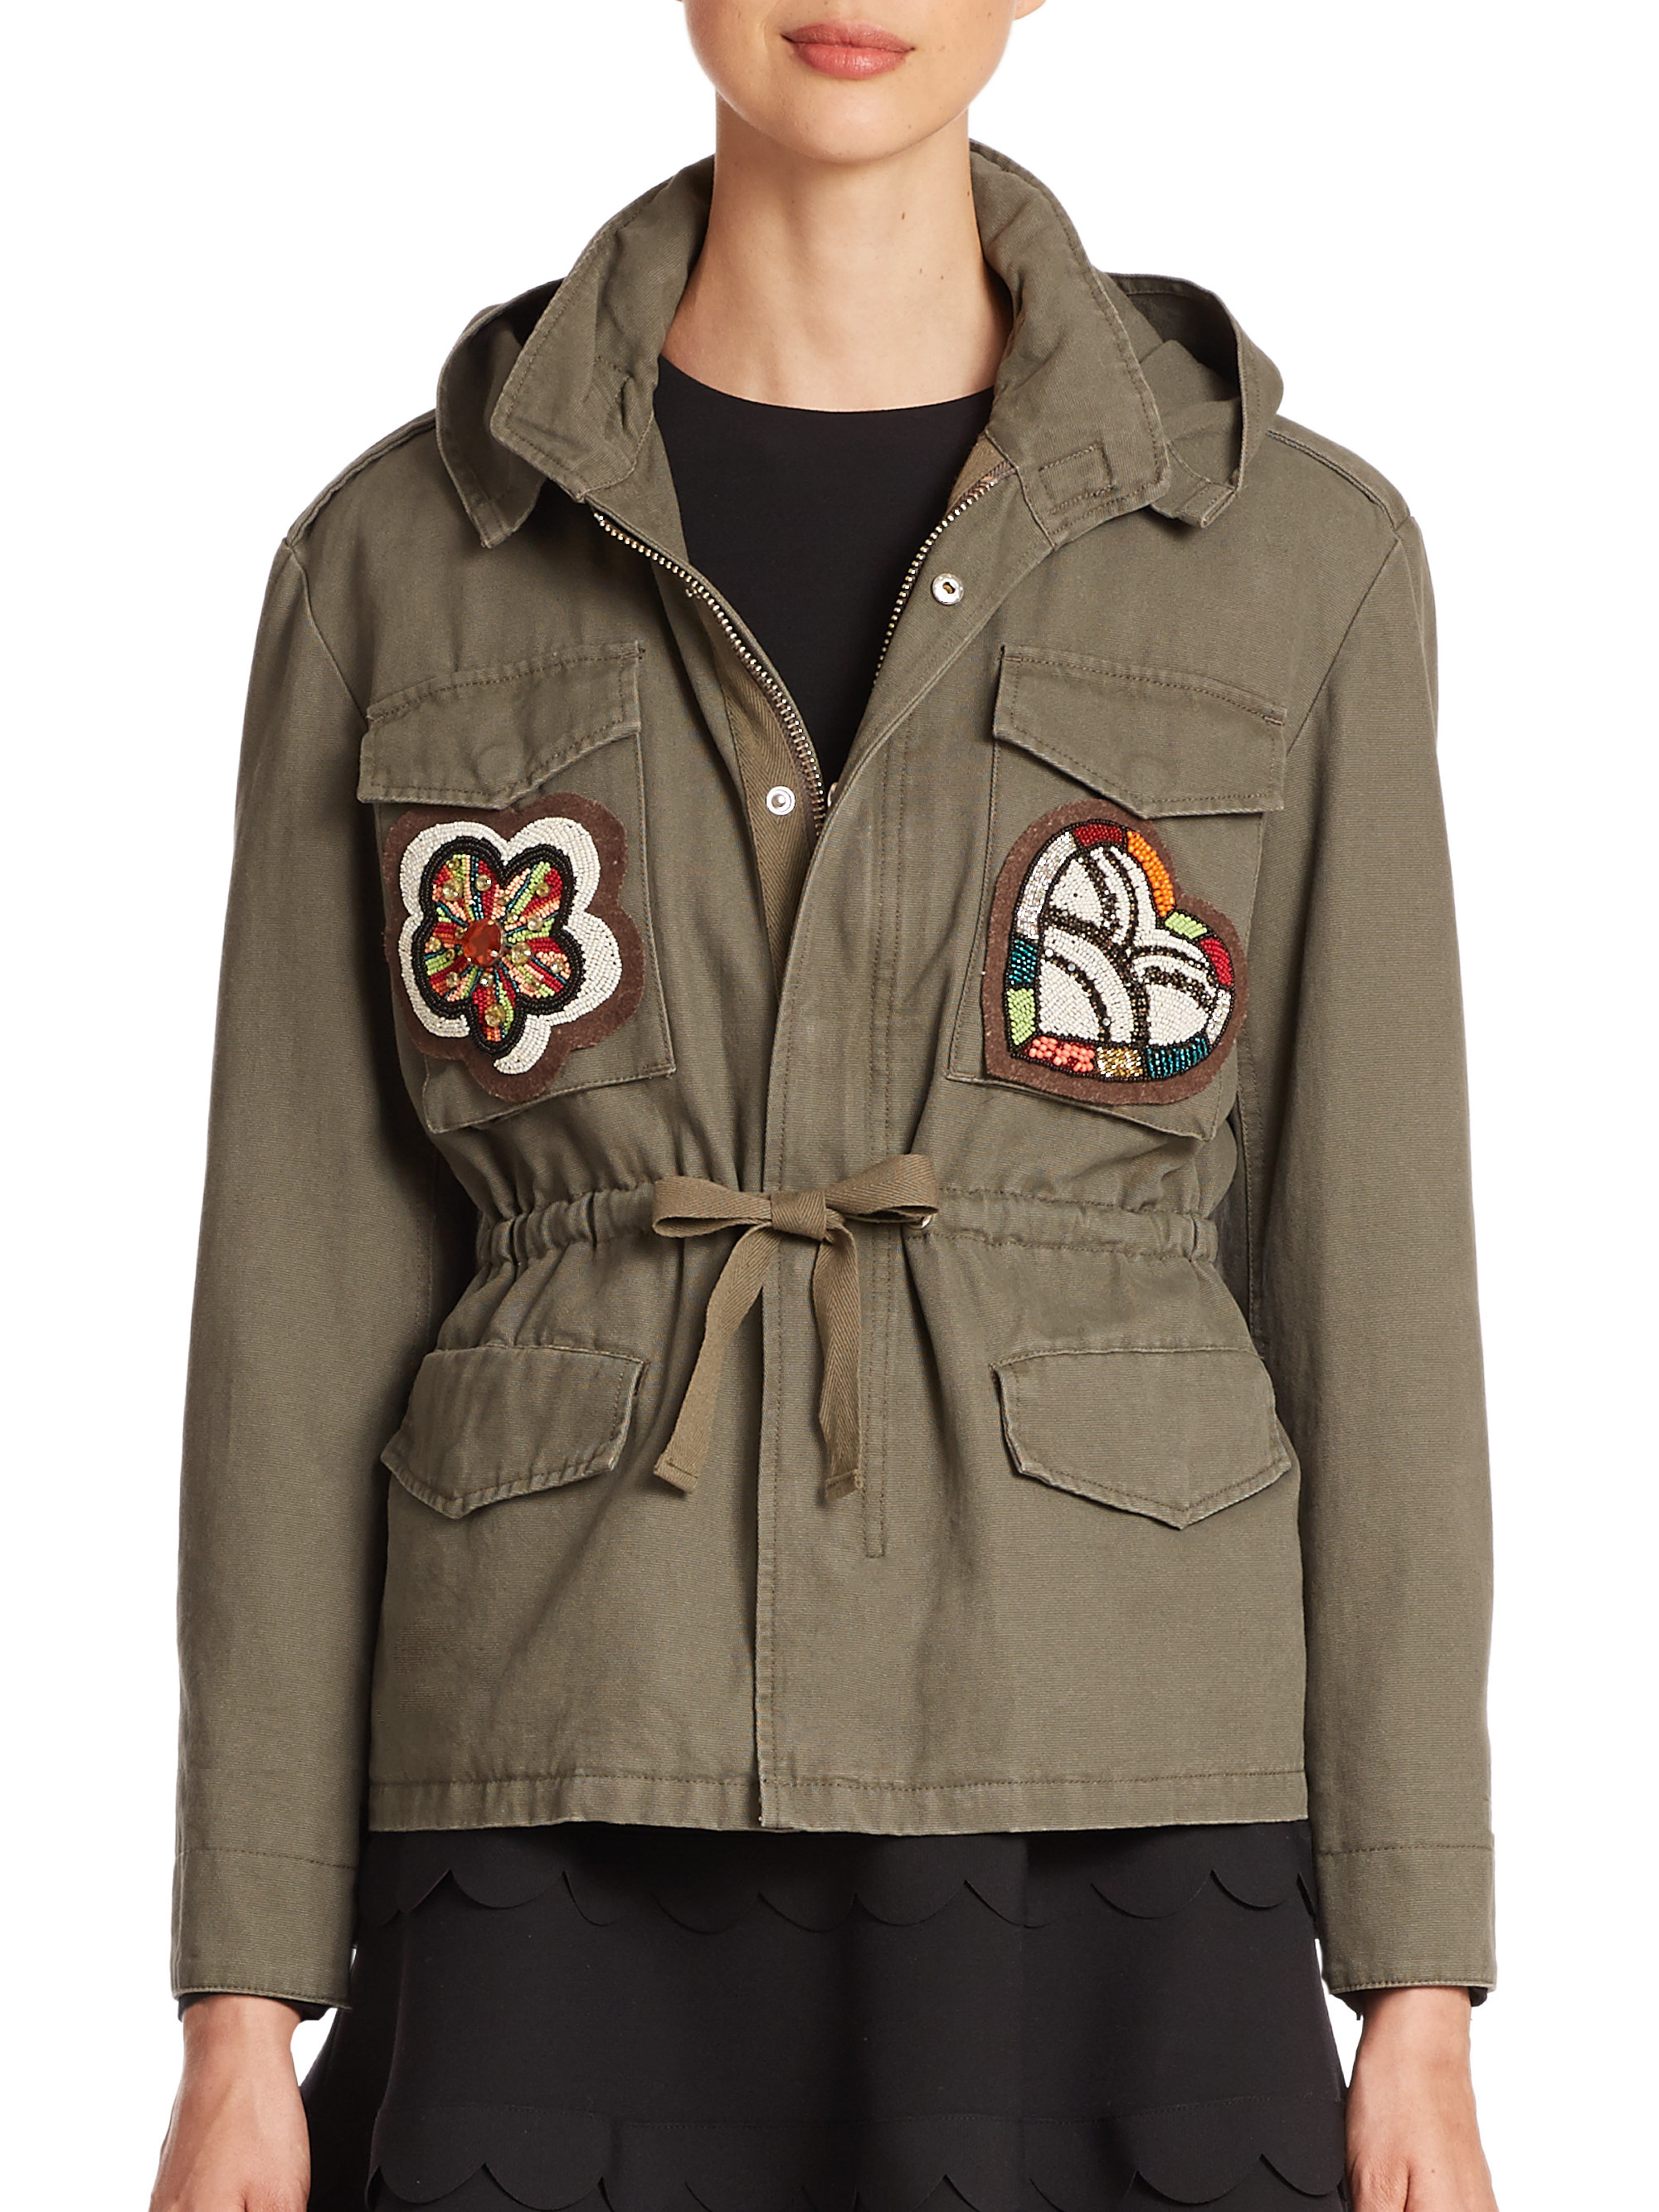 RED Valentino Appliqué Military Jacket in Green - Lyst